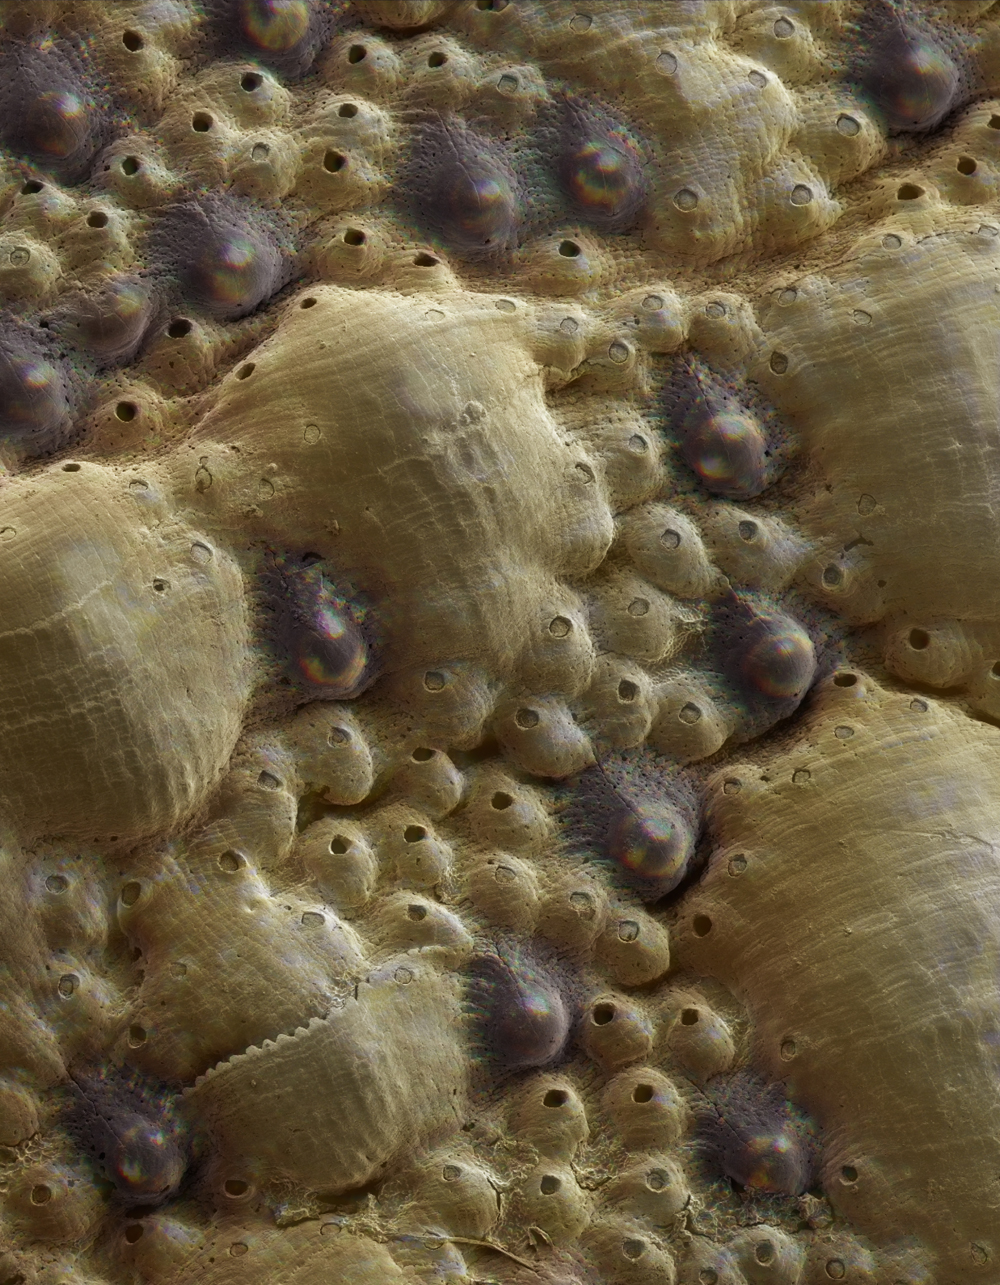 Weird Sea Mollusk Sports Hundreds of Eyes Made of Armor | Live Science